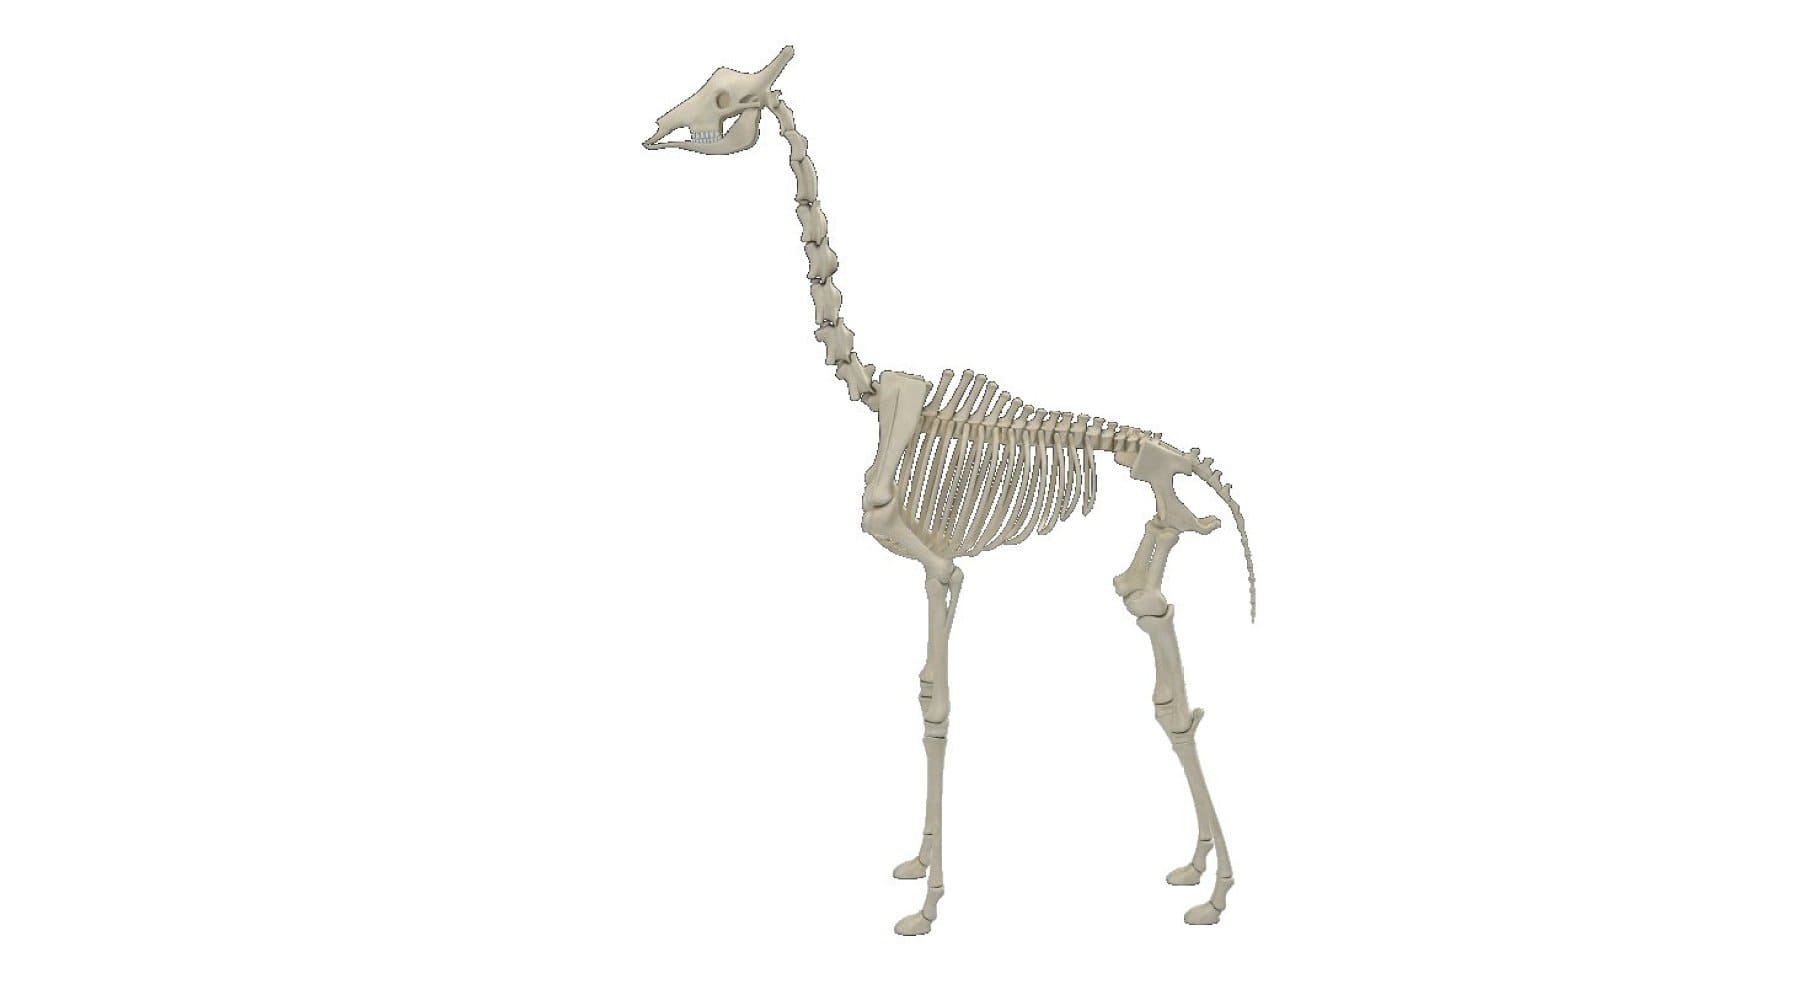 An image of a giraffe skeleton on a white background.